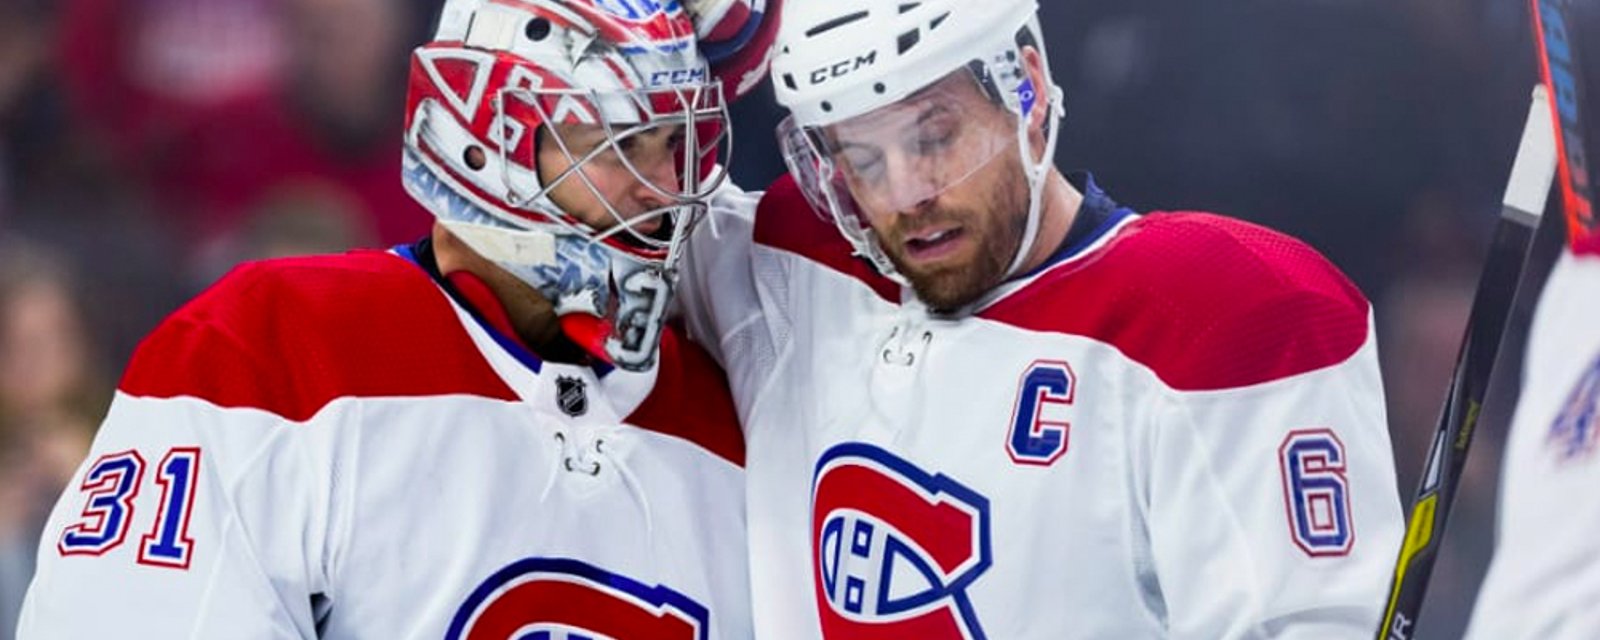 New lockdown rules in Quebec could have a major impact on Canadiens games